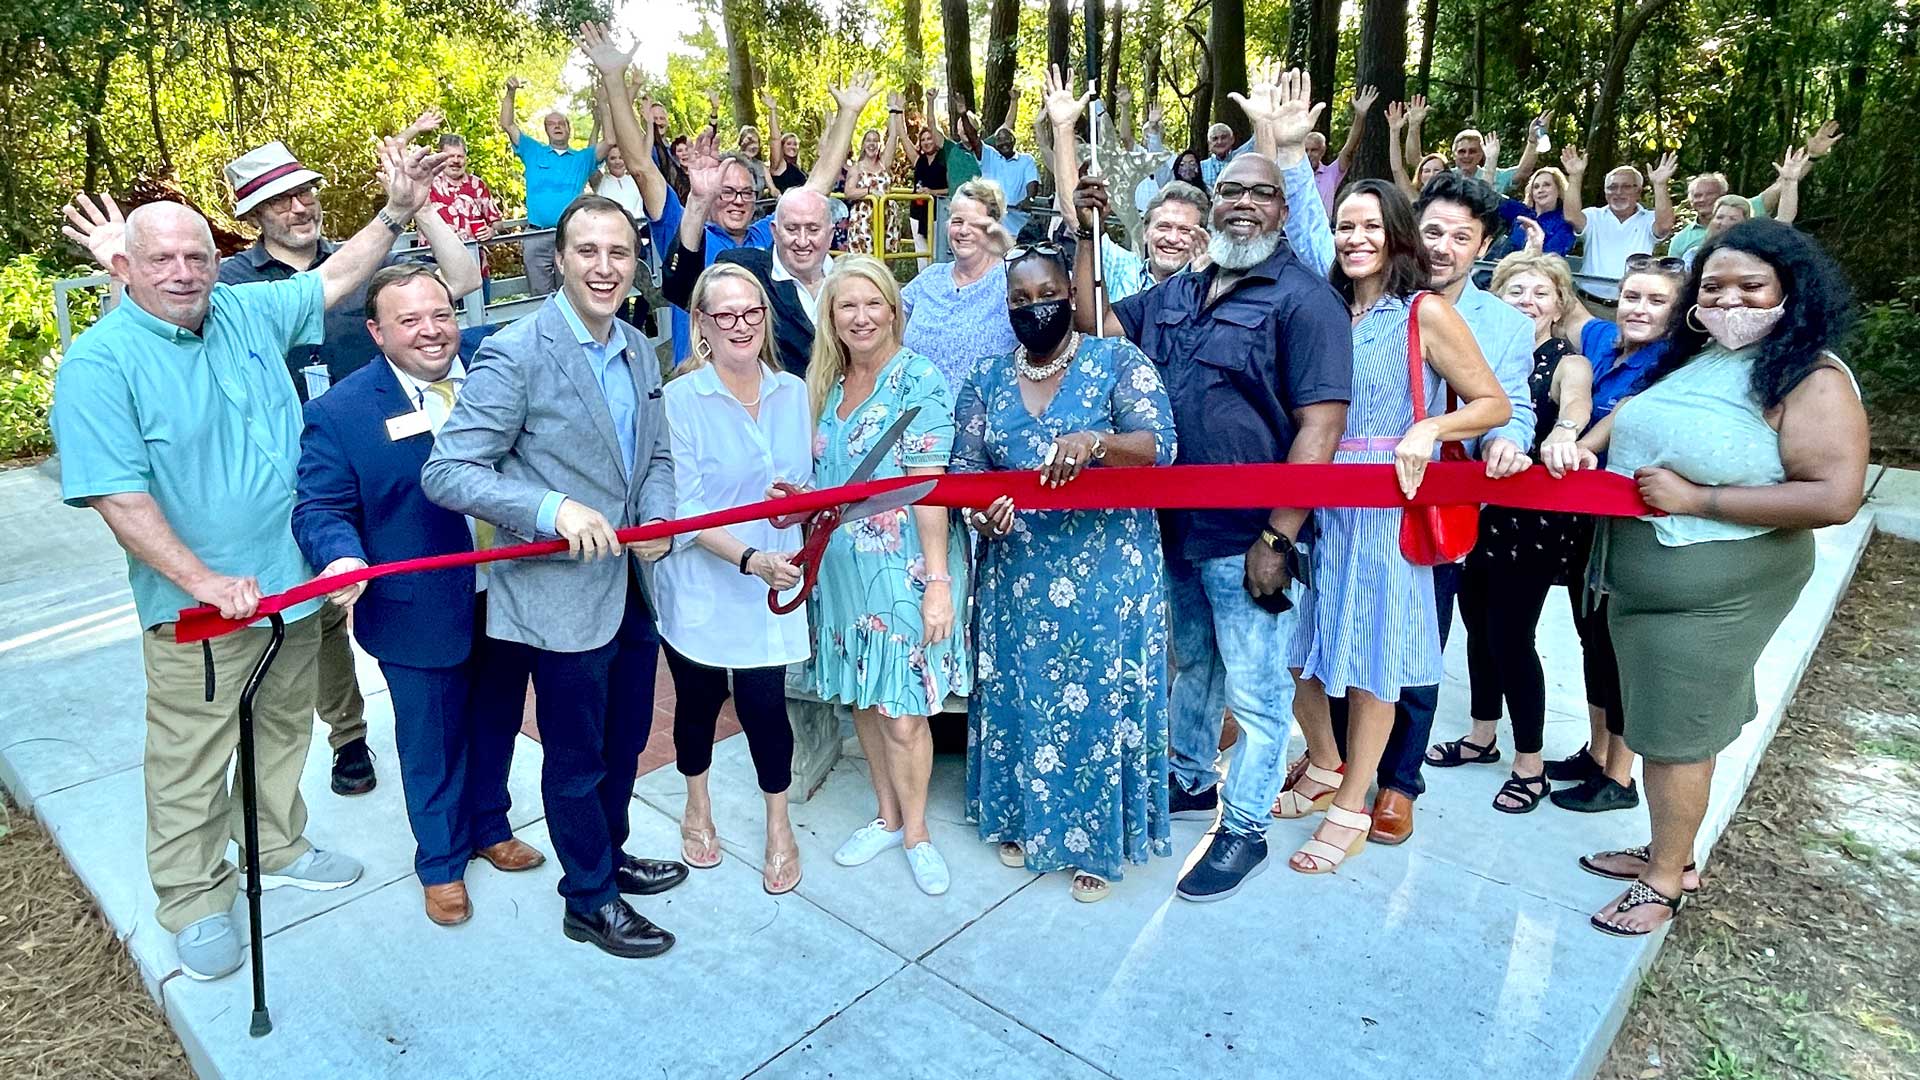 Group photo from Savannah Center for Blind and Low Vision’s Mobility Trail Ribbon Cutting event on August 19th, 2021